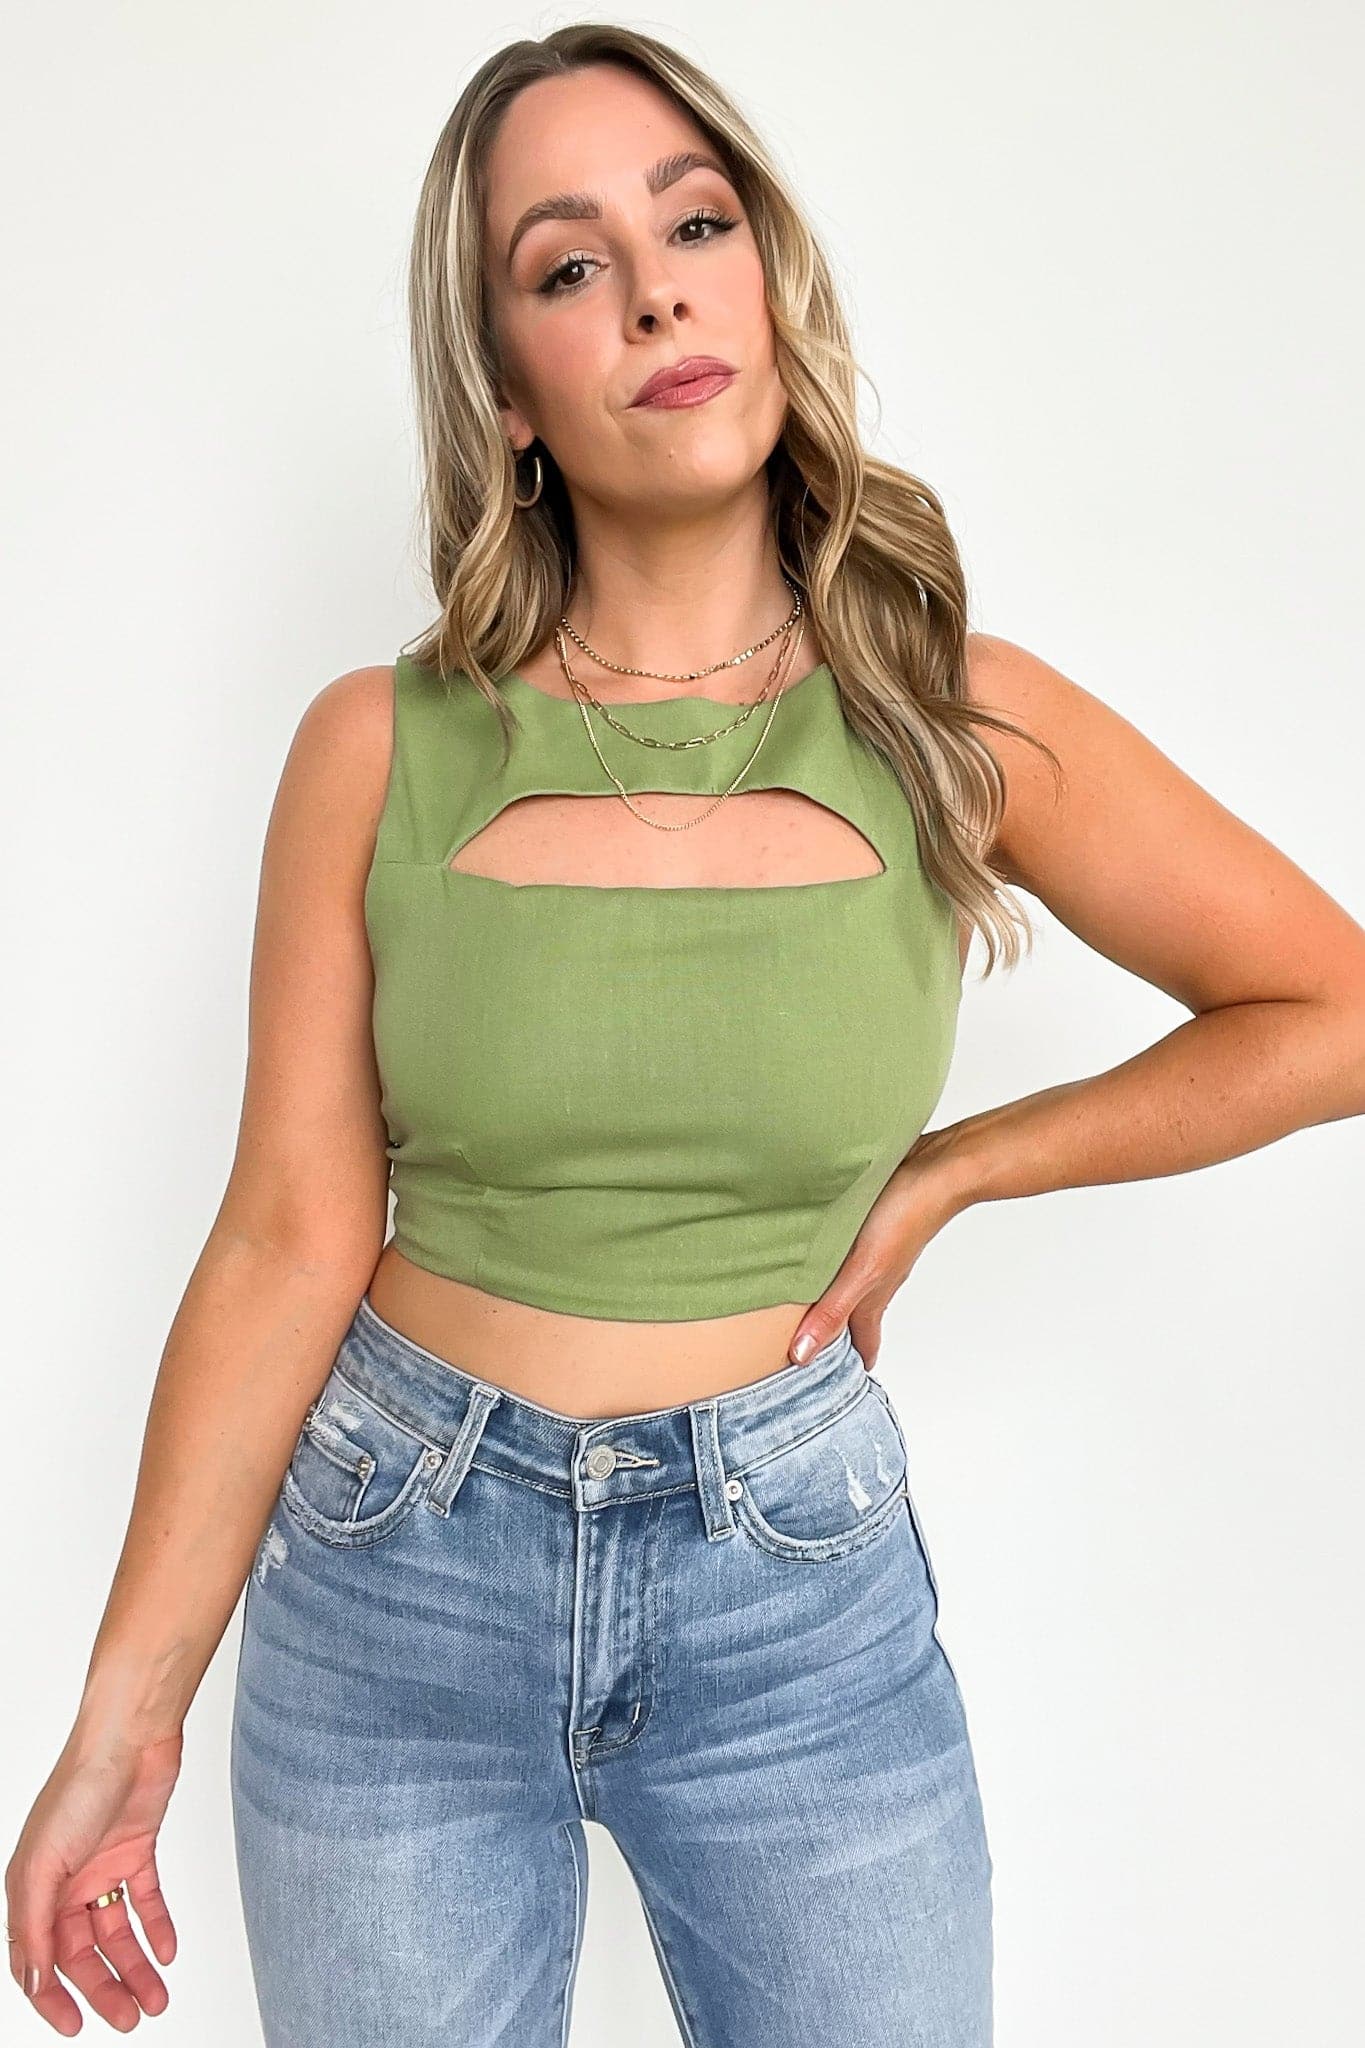  Miami Afternoons Cutout Crop Top - FINAL SALE - Madison and Mallory